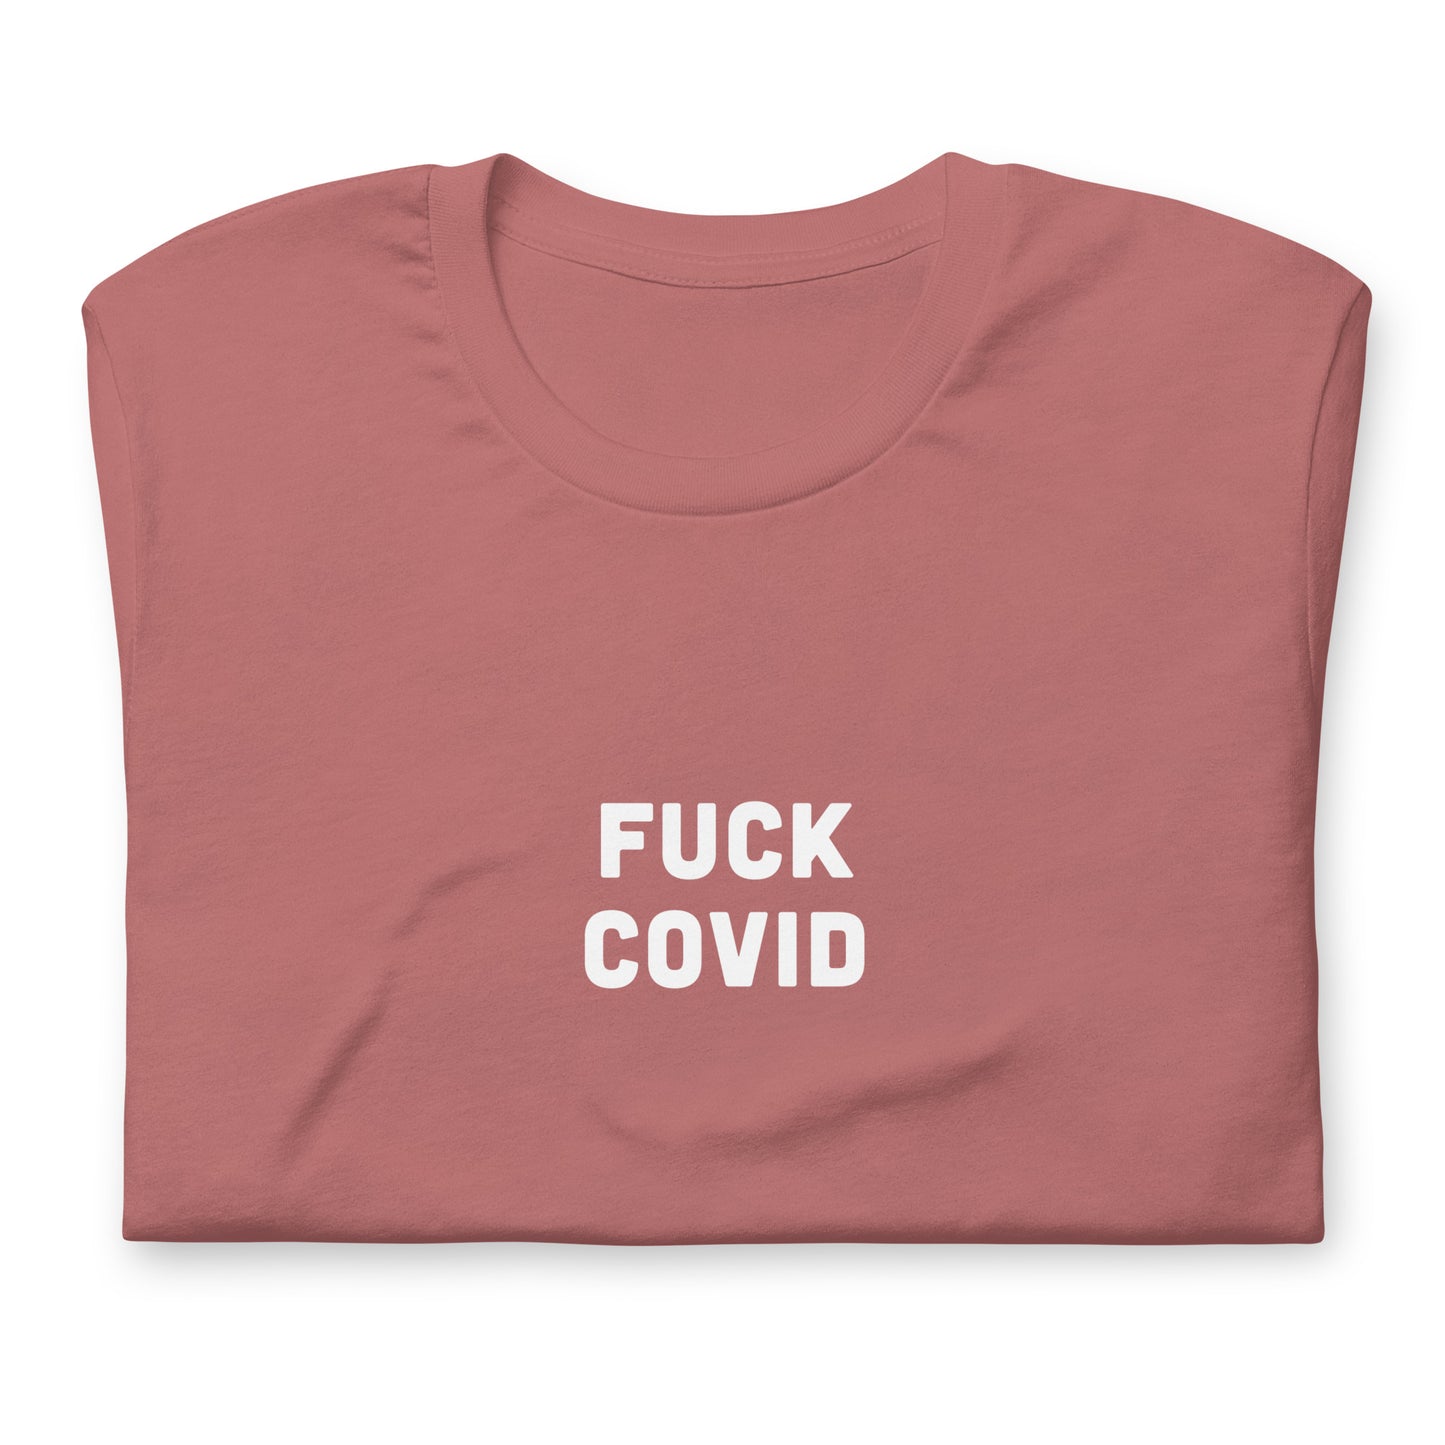 Fuck Covid T-Shirt Size 2XL Color Navy